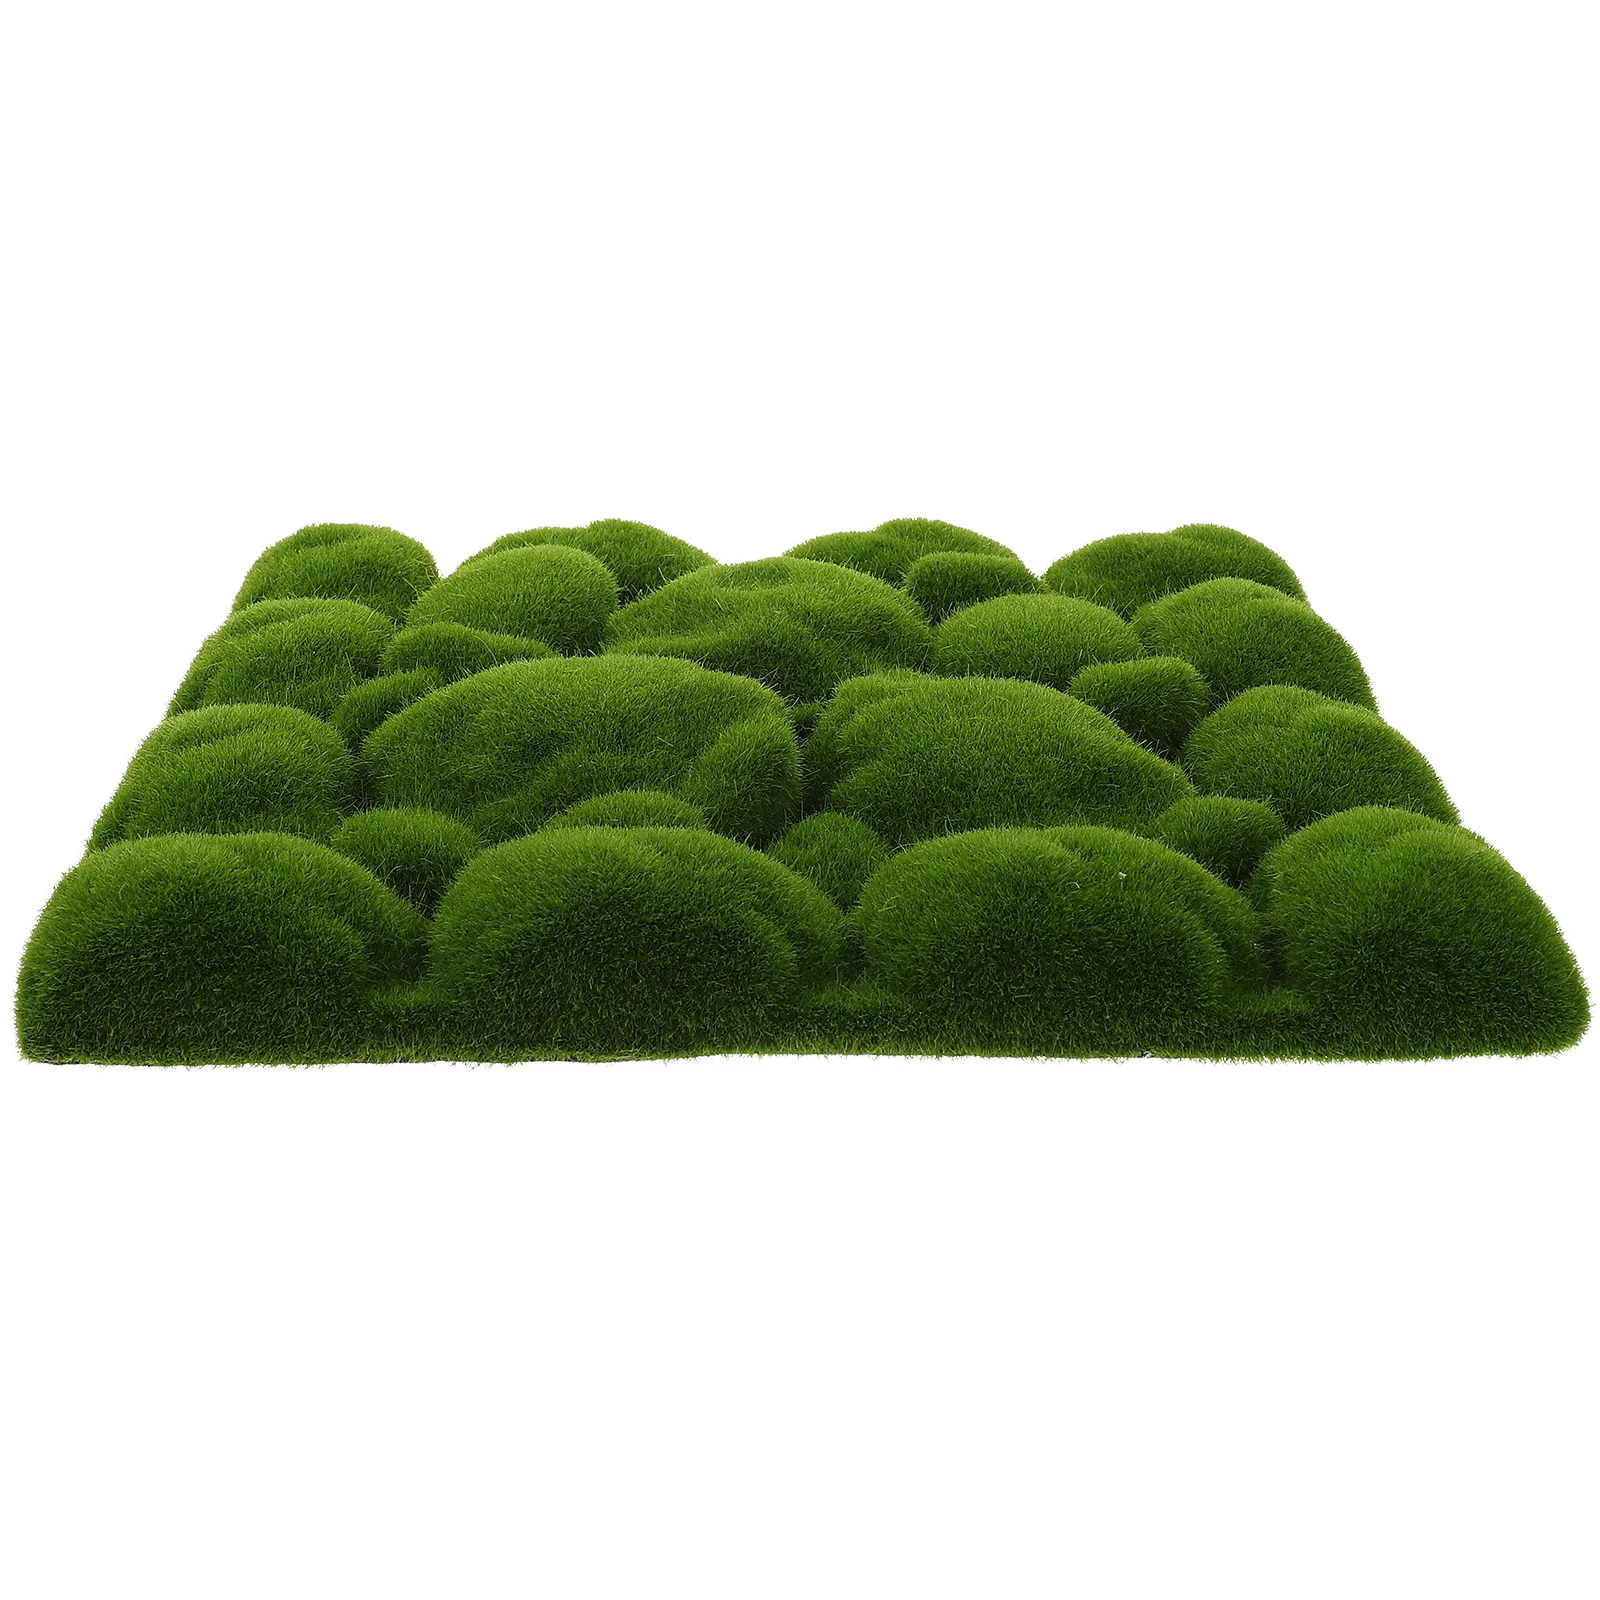 

Wall Artificial Fake Grass Green Mat Decorboard Faux Plantsdecoration Rug Panelspanel Turf Privacy Simulation Background Crafts